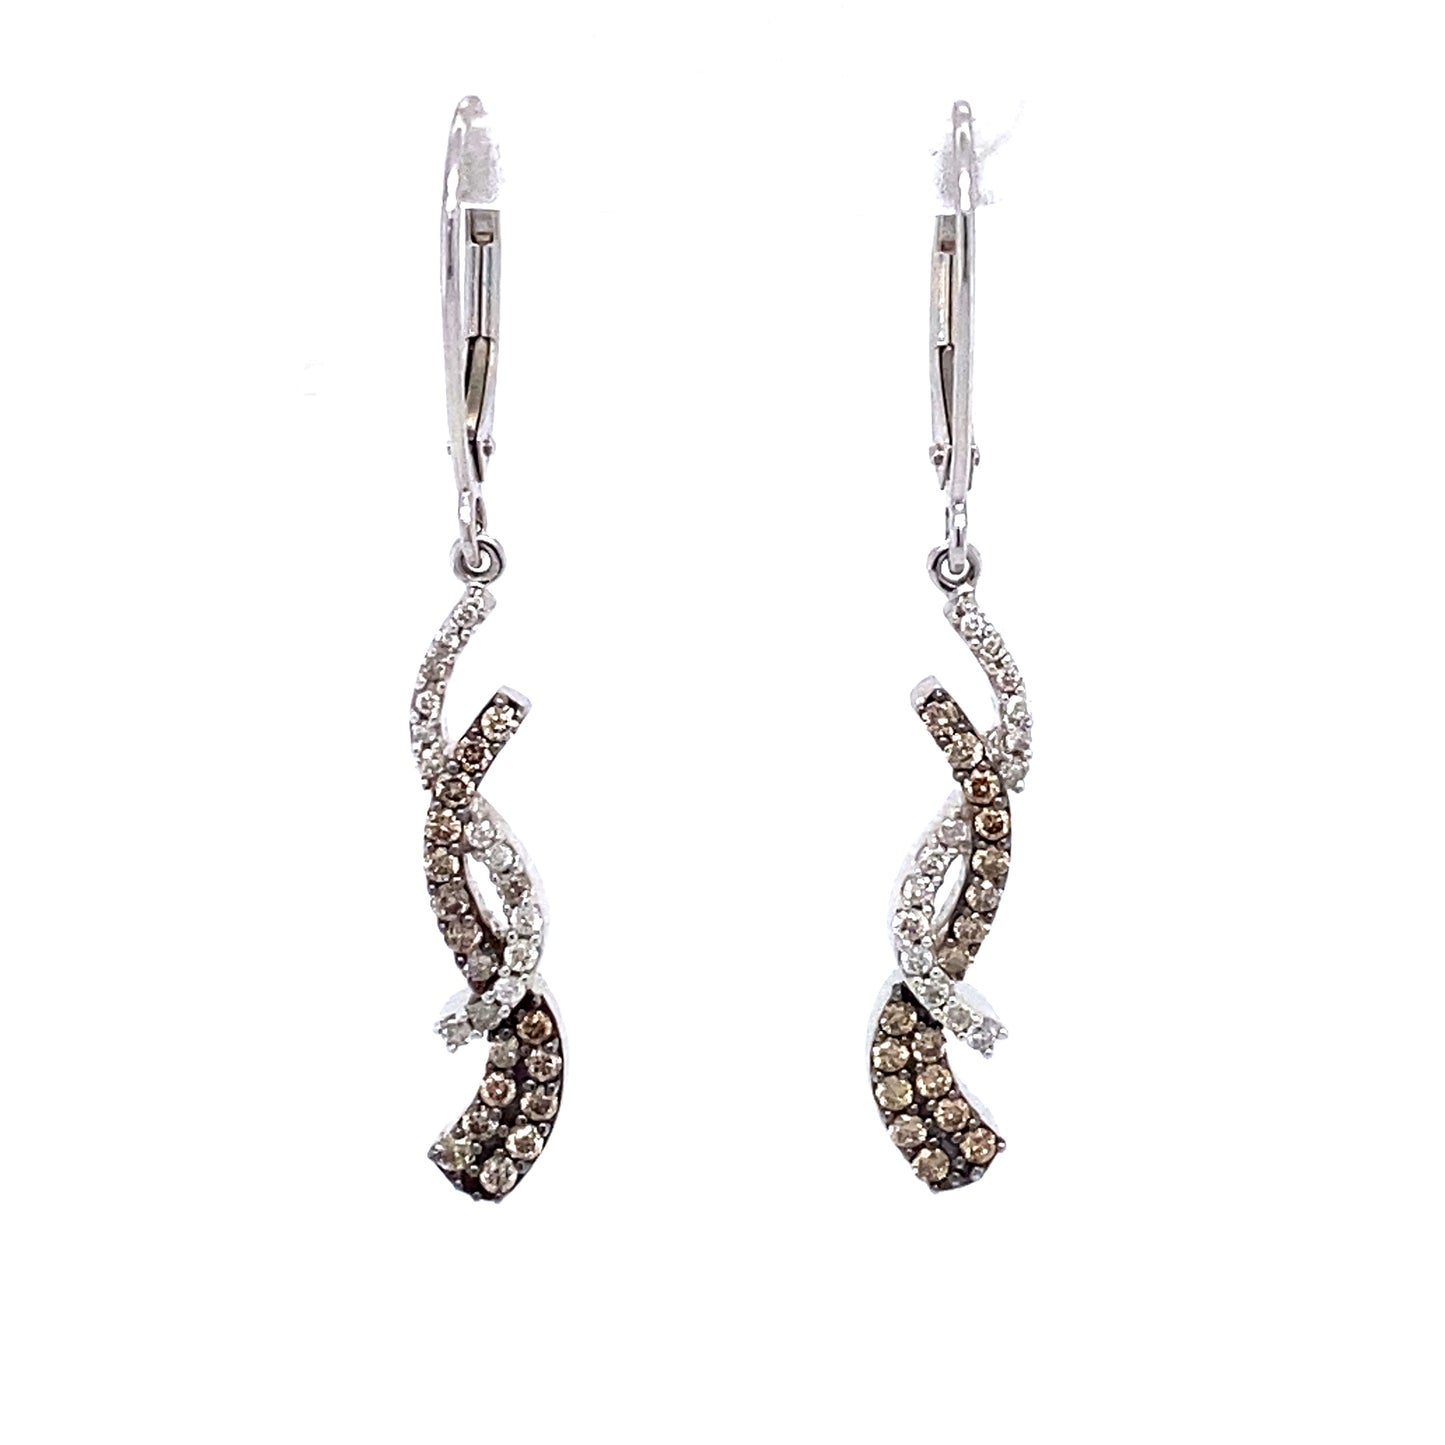 Circa 1980 Brown and White Diamond Twist Chandelier Earrings in 14K White Gold